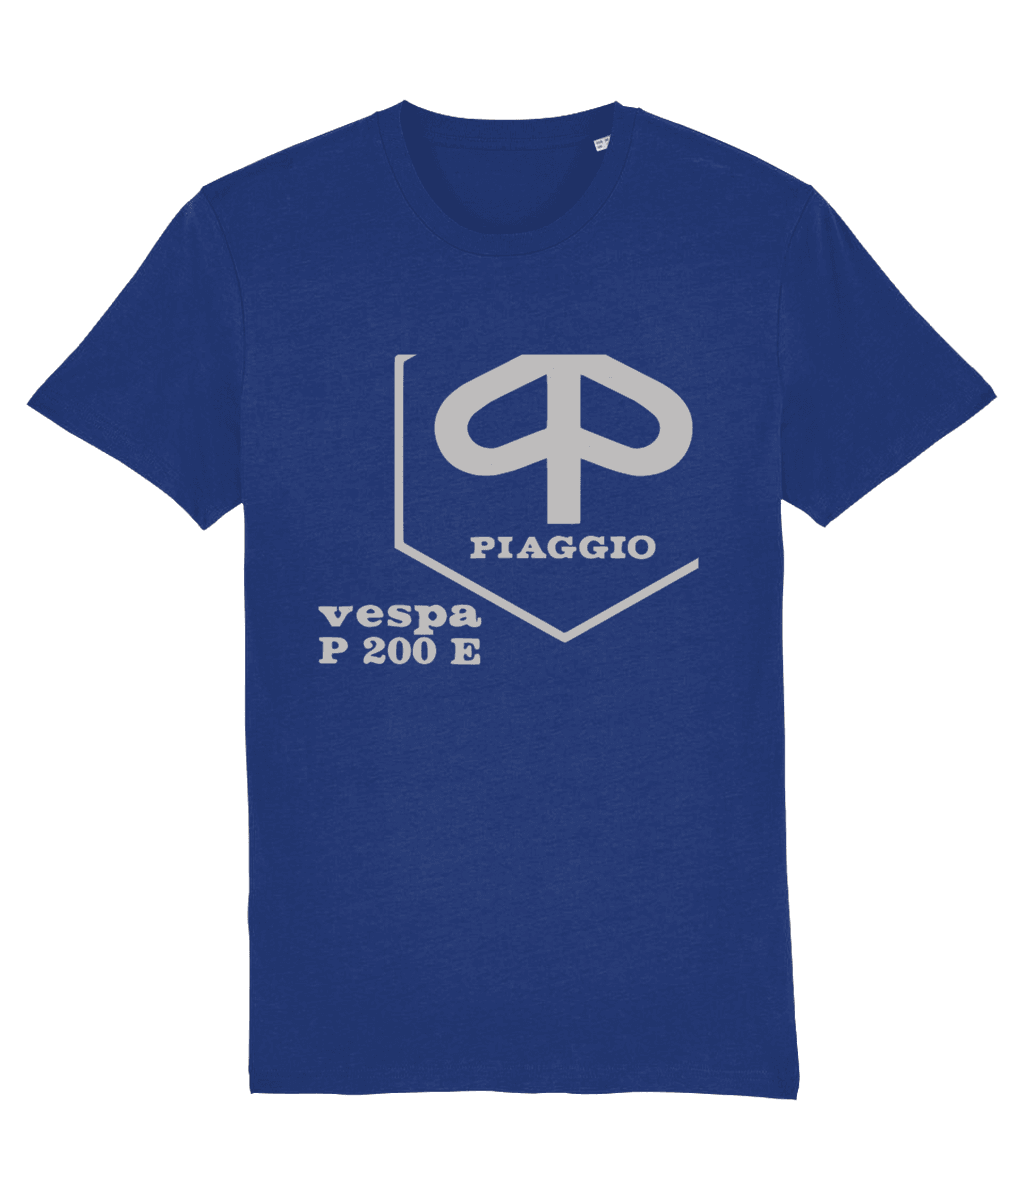 P200E: T-Shirt Inspired by the Vespa that powered the 1979 Revival (Silver Badge with 4 Colour Options) Small to 4XL - SOUND IS COLOUR